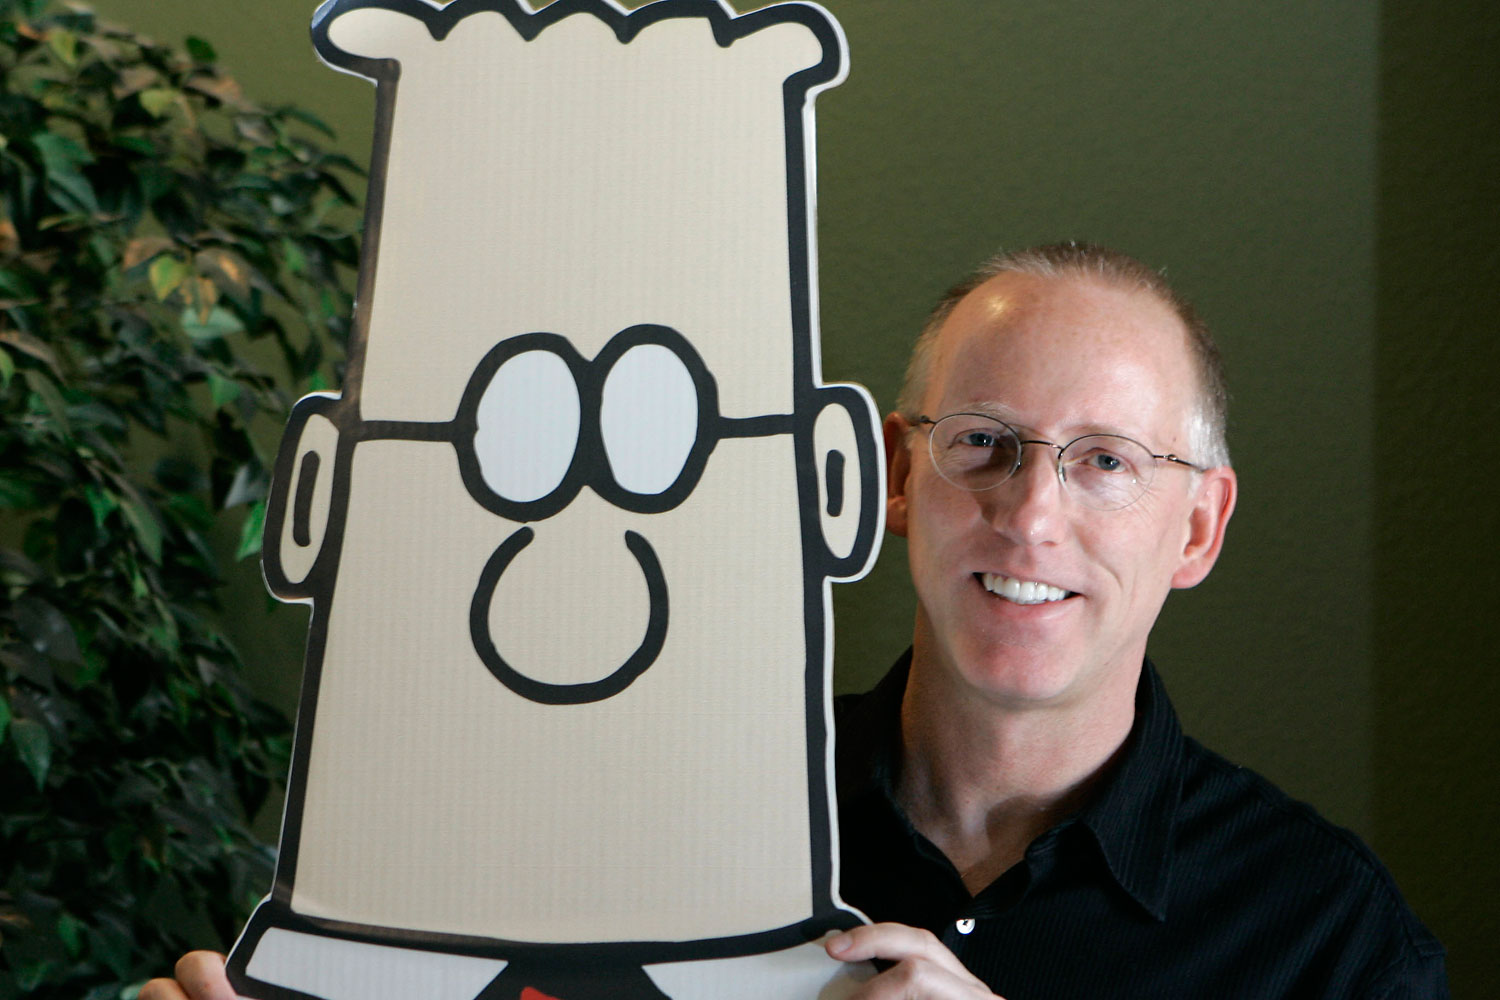 Scott Adams, creator of the comic strip Dilbert, poses for a portrait with the Dilbert character in his studio in Dublin, Calif., Thursday, Oct. 26, 2006. 